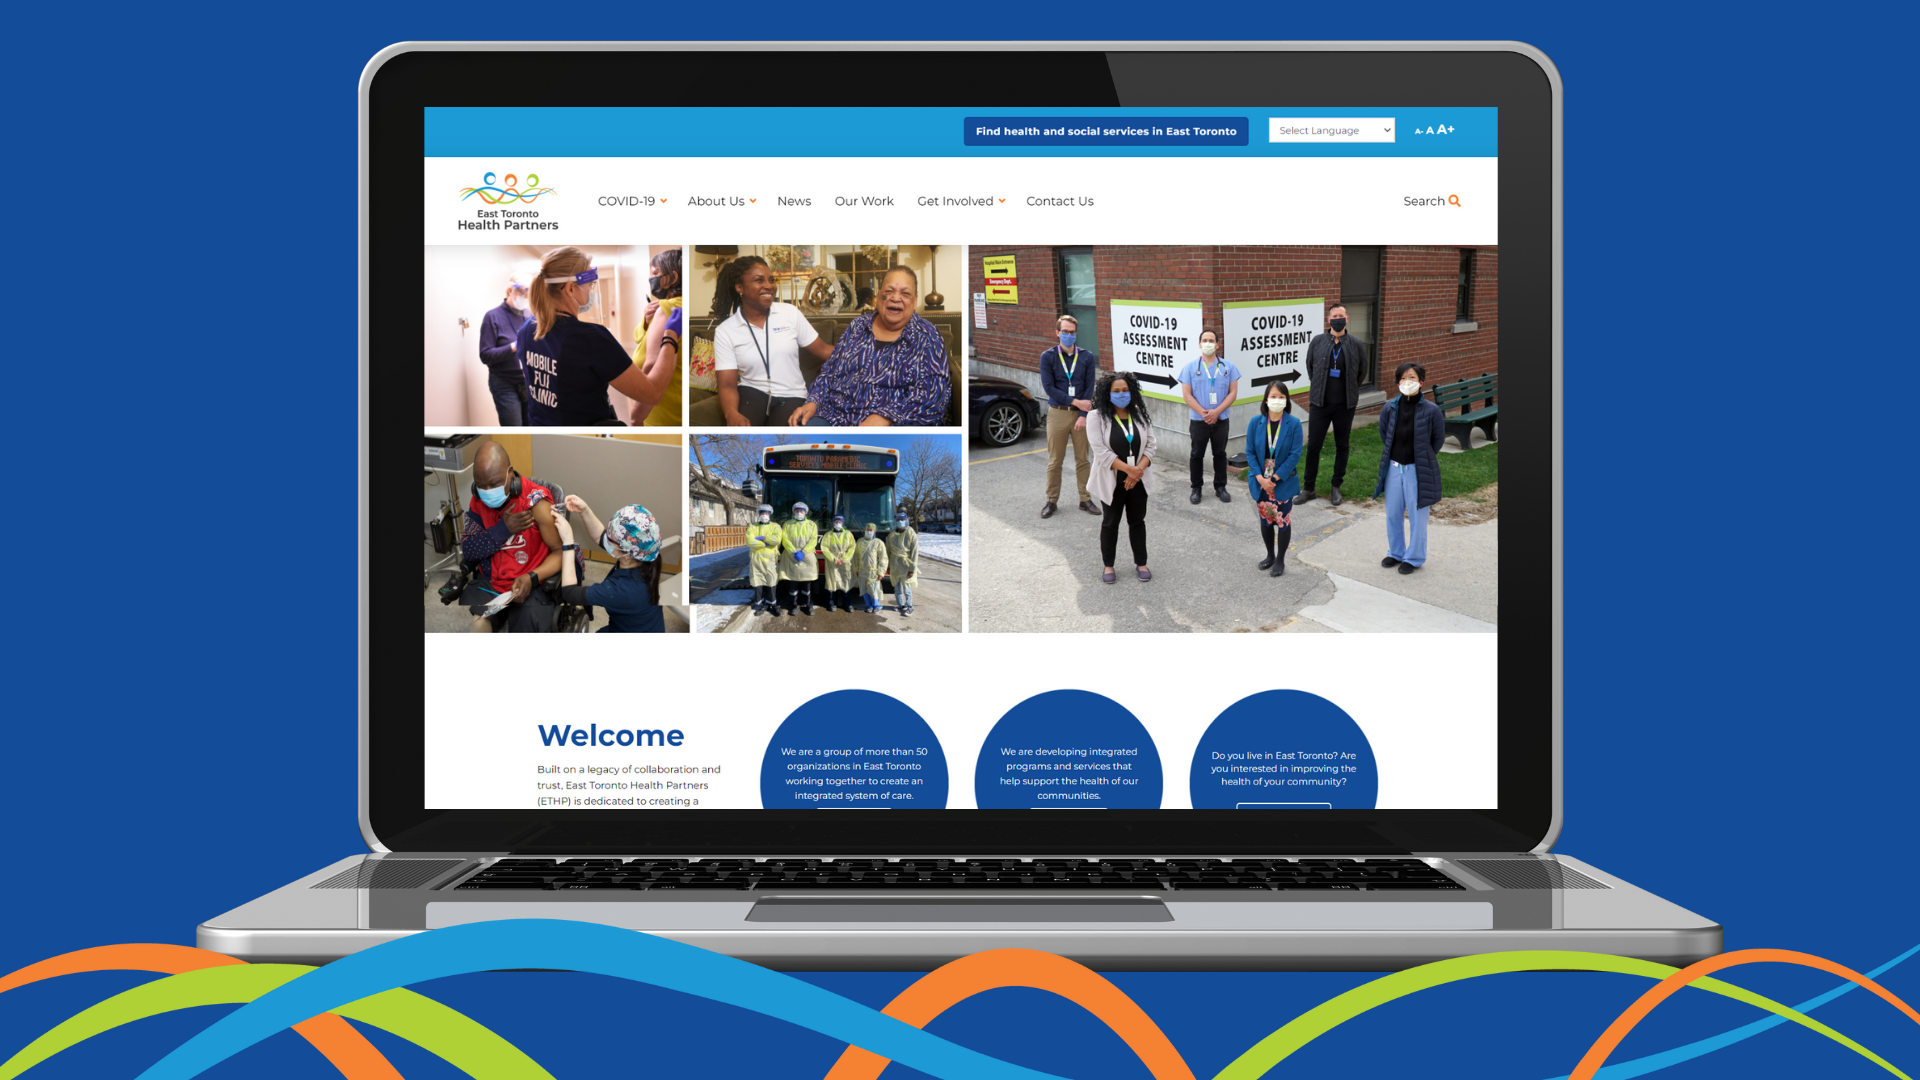 Featured image for “Welcome to our new home! East Toronto Health Partners officially launches new website”